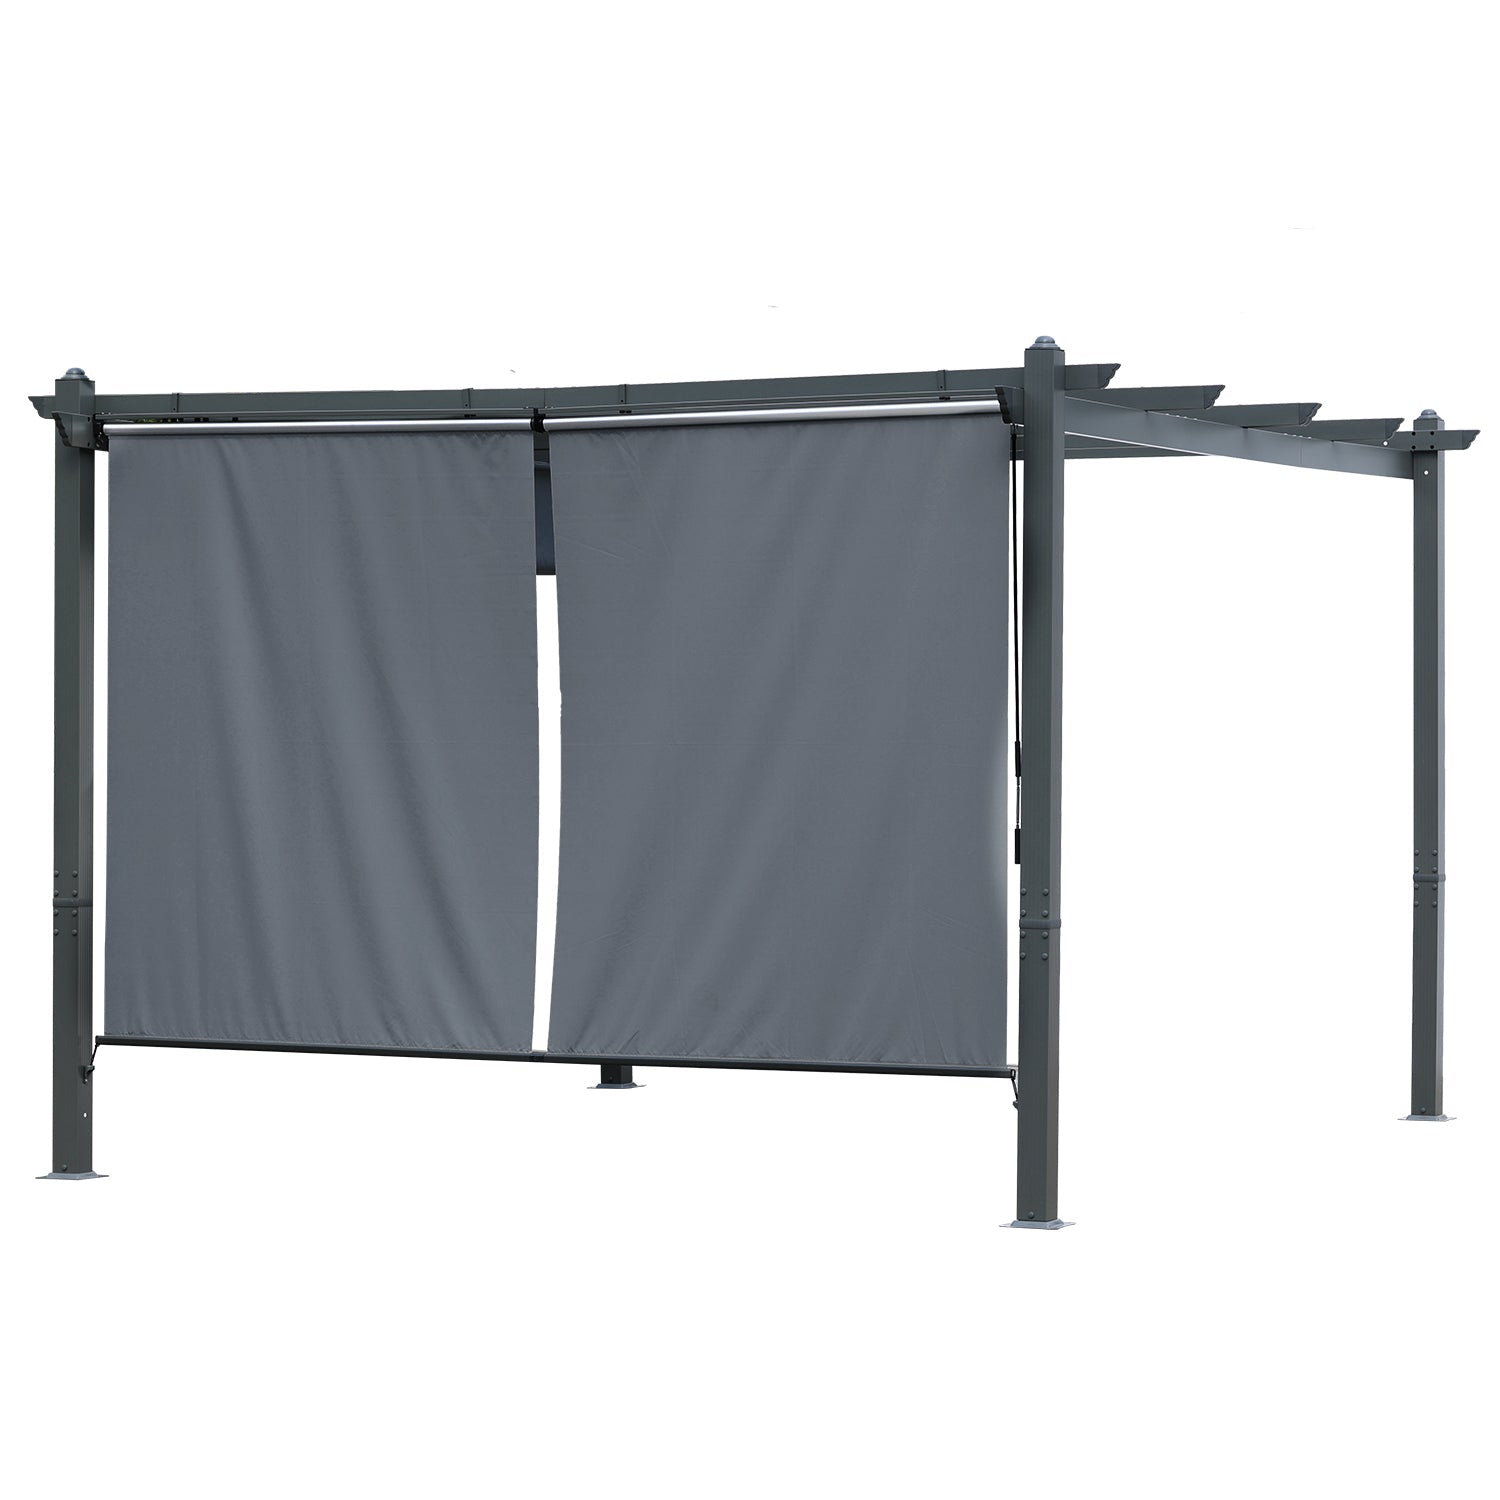 Roller Shade - 2 Pack of Cordles Pergola Curtains, 4.8' x 6', High-Quality Polyester Fabric for Pergola  Aoodor LLC Grey  